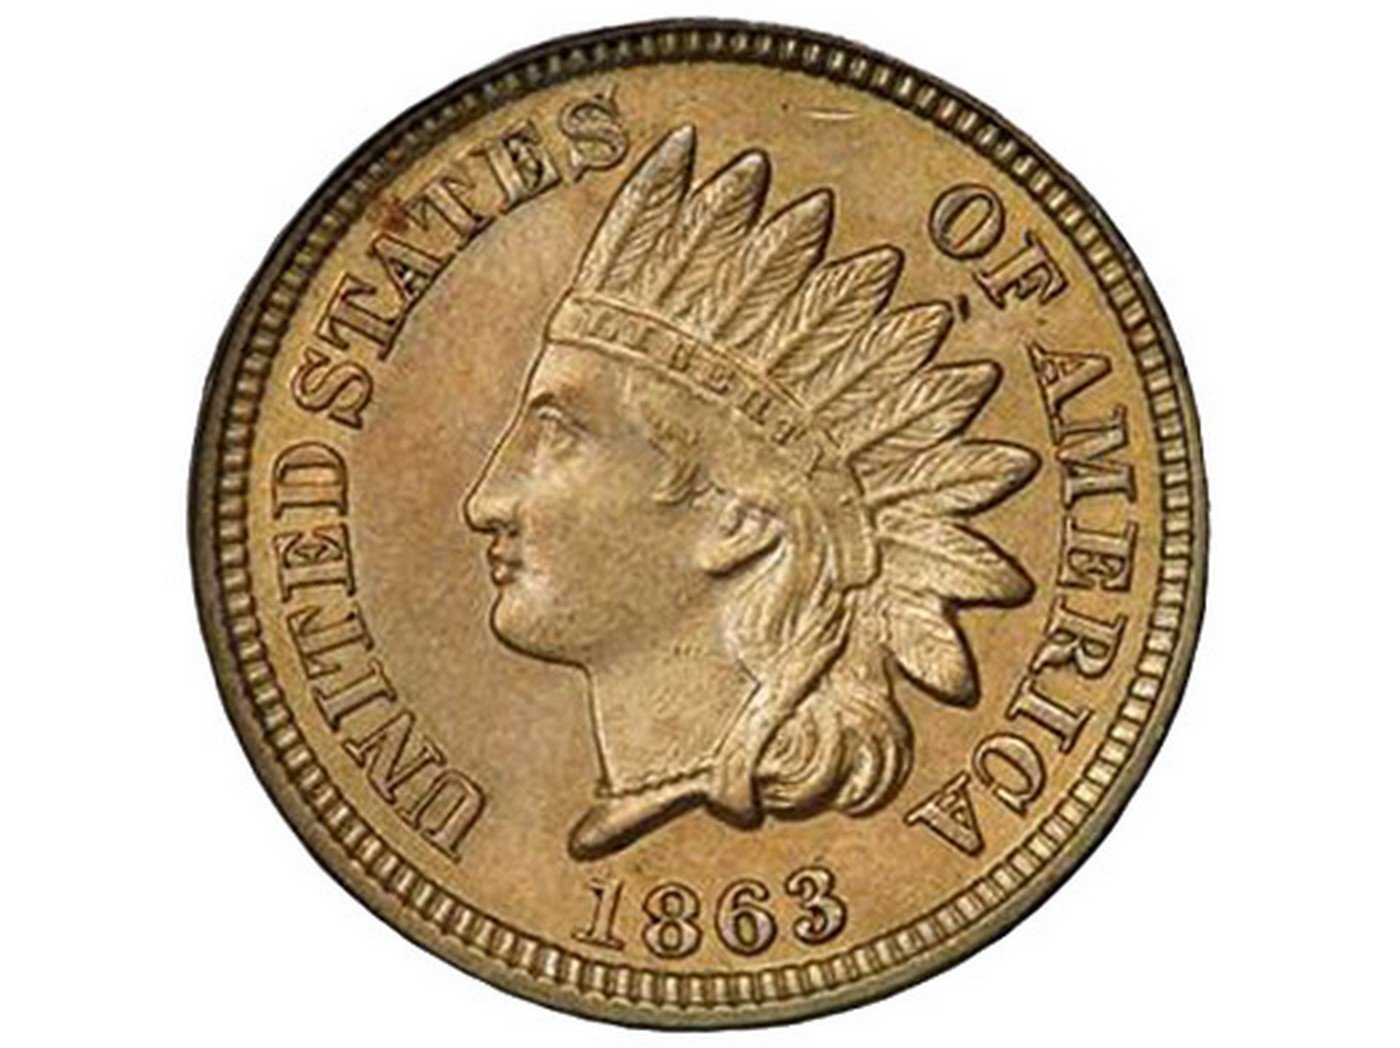 1863 Obverse of CUD-023 - Indian Head Penny - Photo by Todd Pollock of BluCCPhotos.com